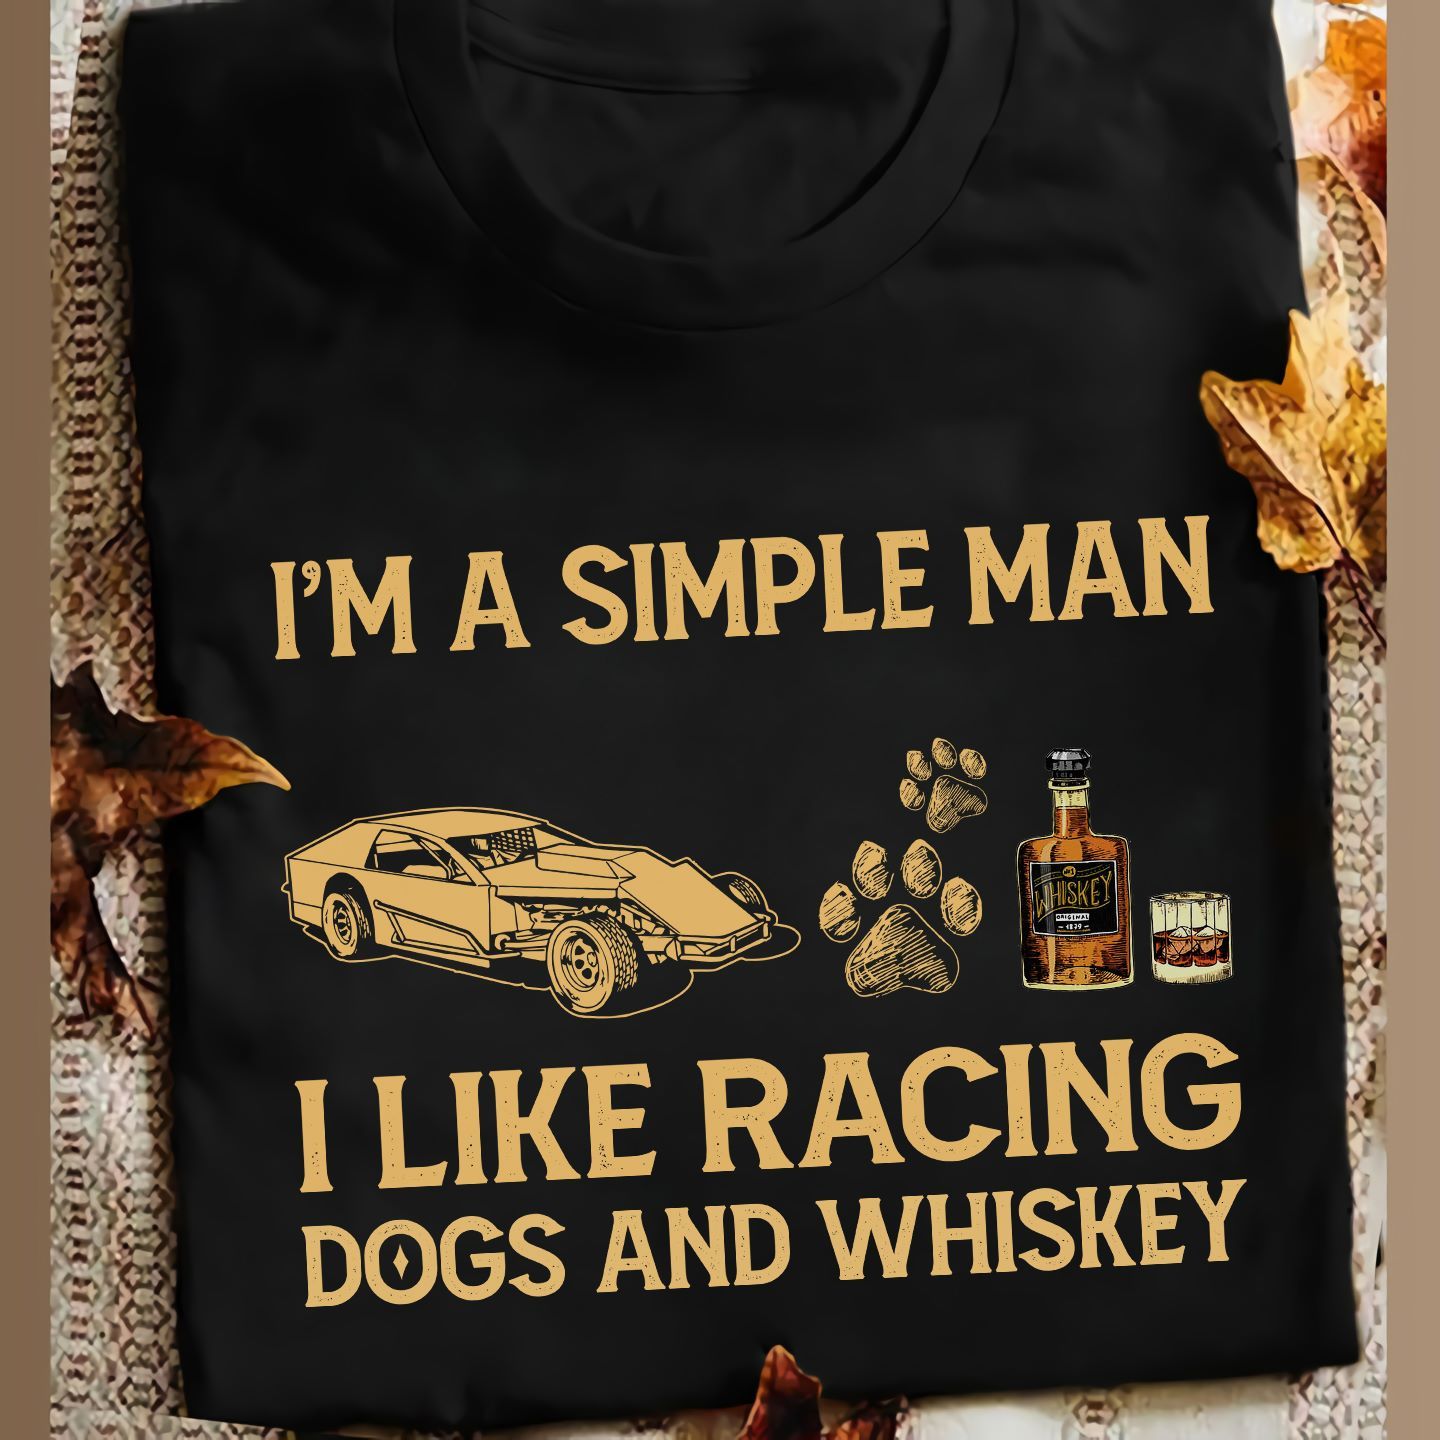 Racing Dogs And Whiskey - I'm a simple man i like racing dogs and whiskey